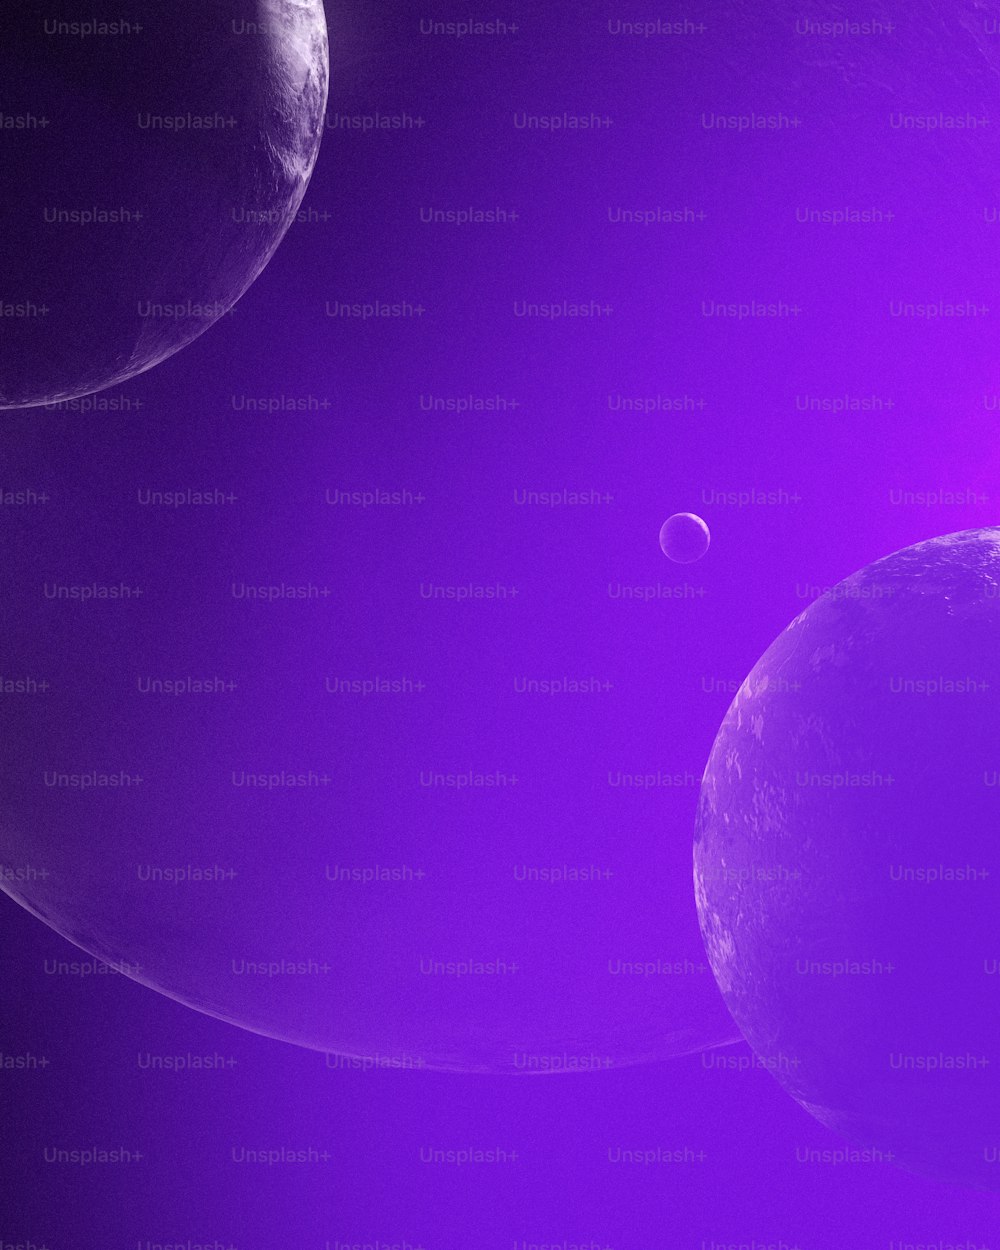 a group of planets with a purple background